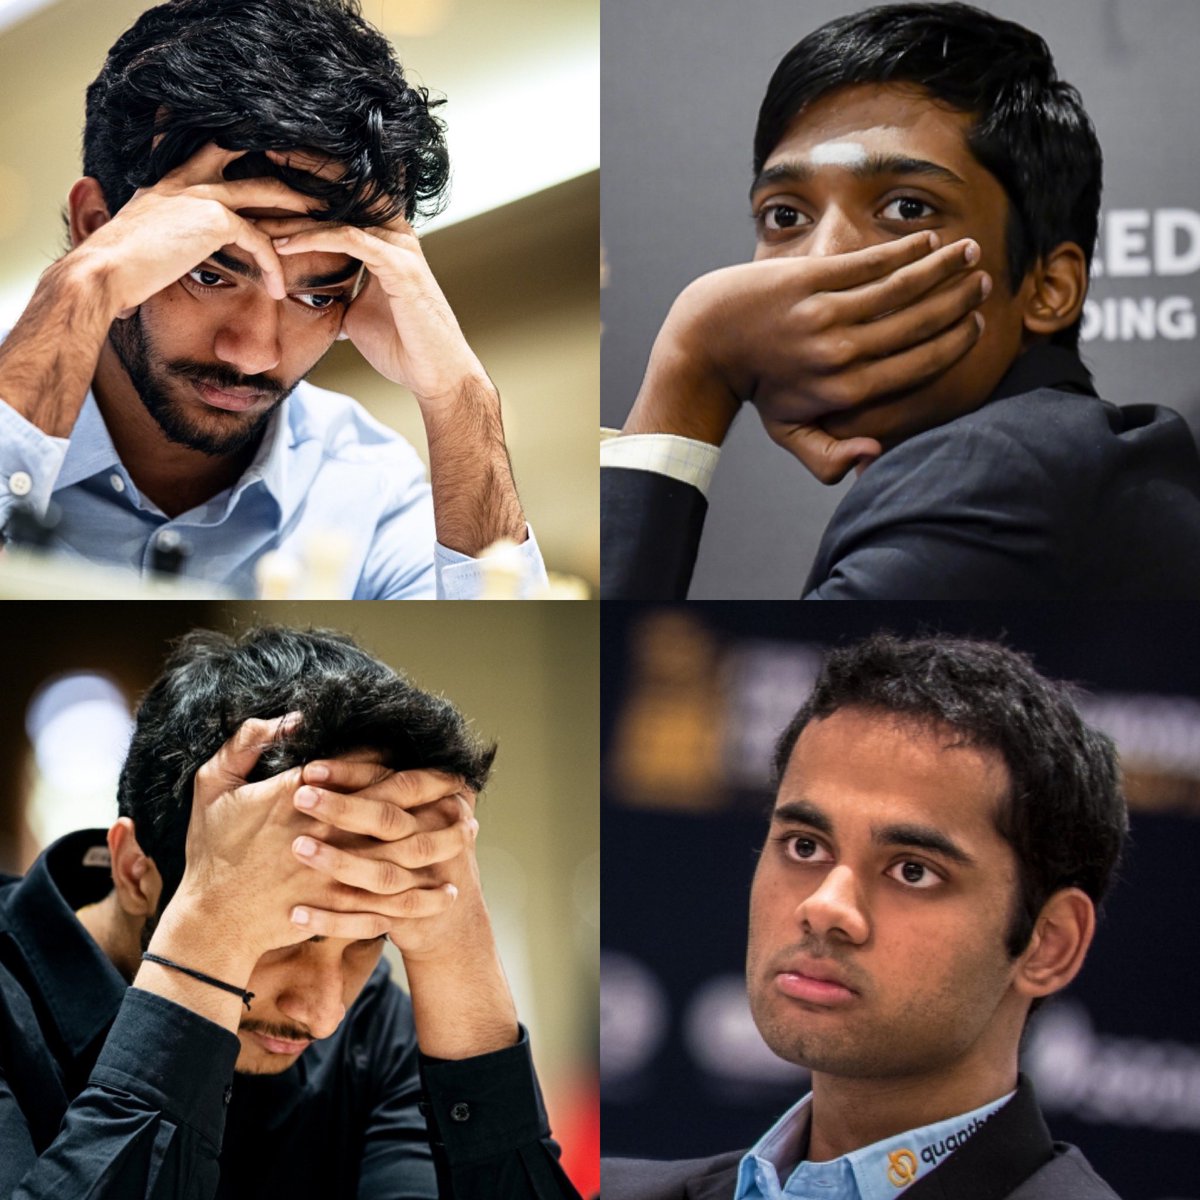 This is insanely amazing! Out of the last 8 in the 2023 @FIDE_chess World Cup, 4 are from India 🇮🇳! @viditchess being the oldest is ONLY 28! @DGukesh @rpragchess @ArjunErigaisi are all TEENAGERS! The US has 2 with Caruana & Dominguez, Carlsen, and host country hero Abasov. No…